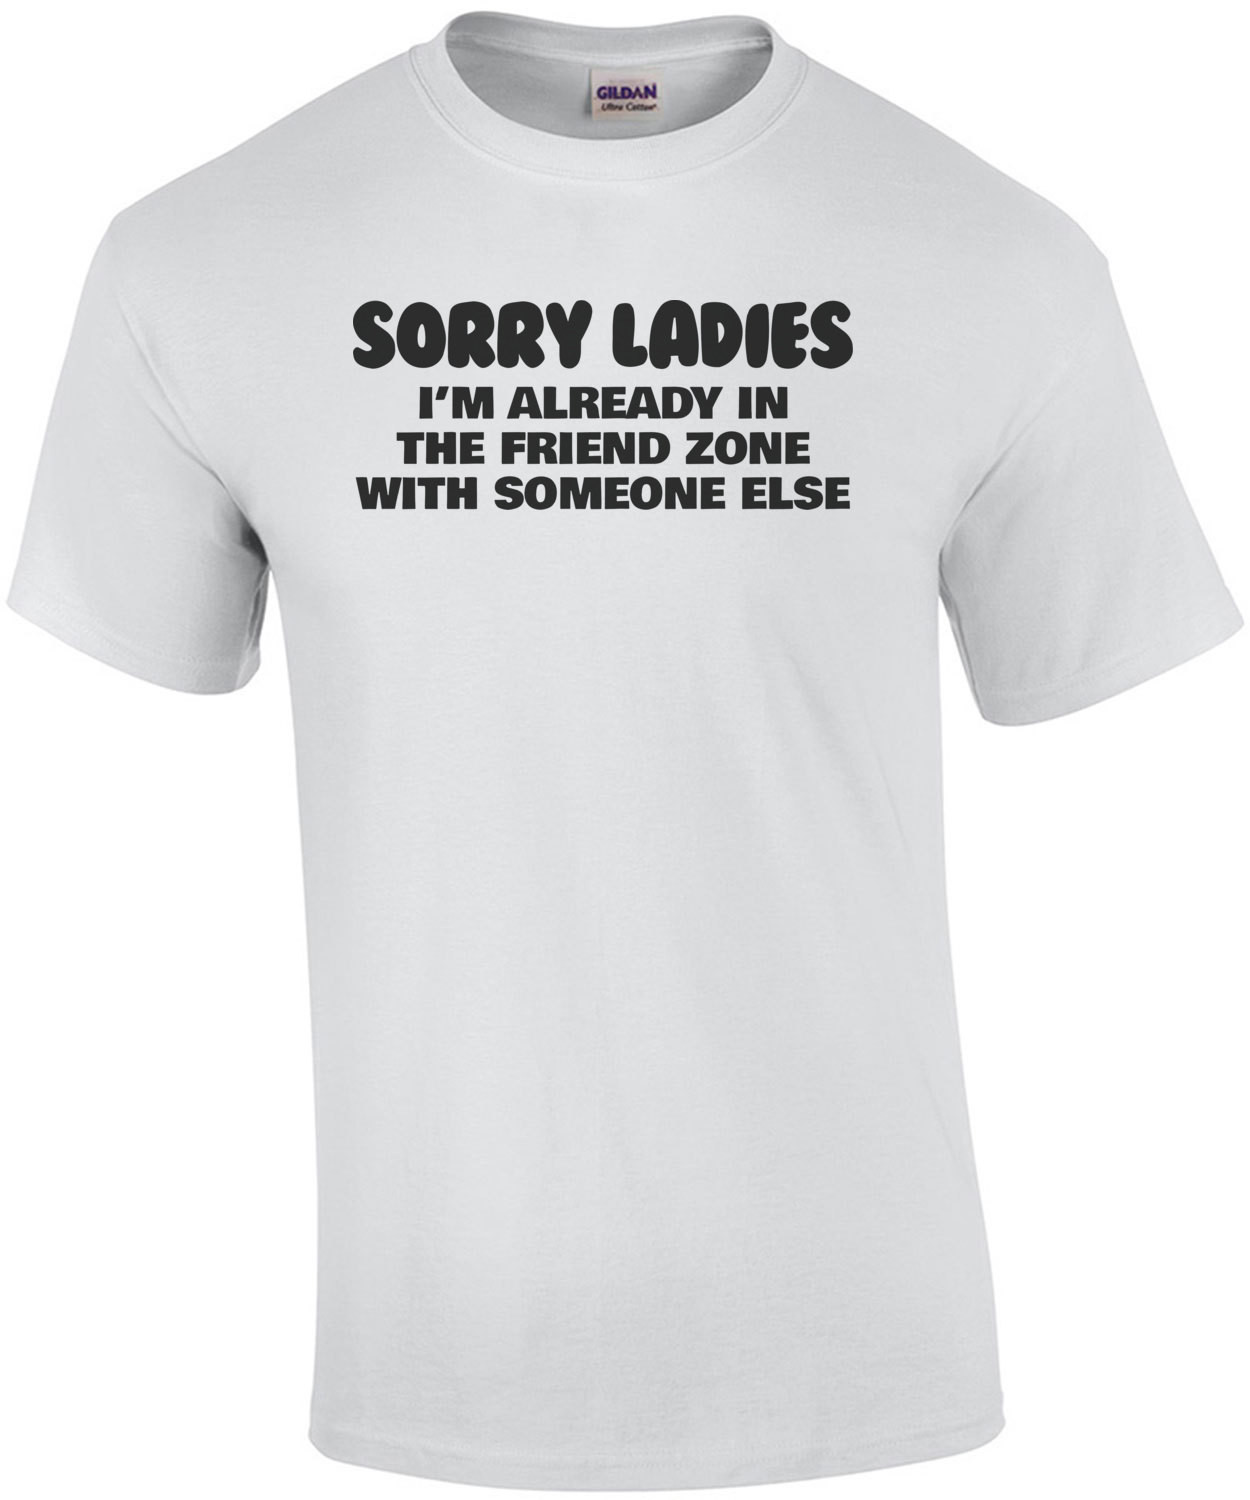 Sorry Ladies I'm Already In The Friend Zone With Someone Else T-Shirt